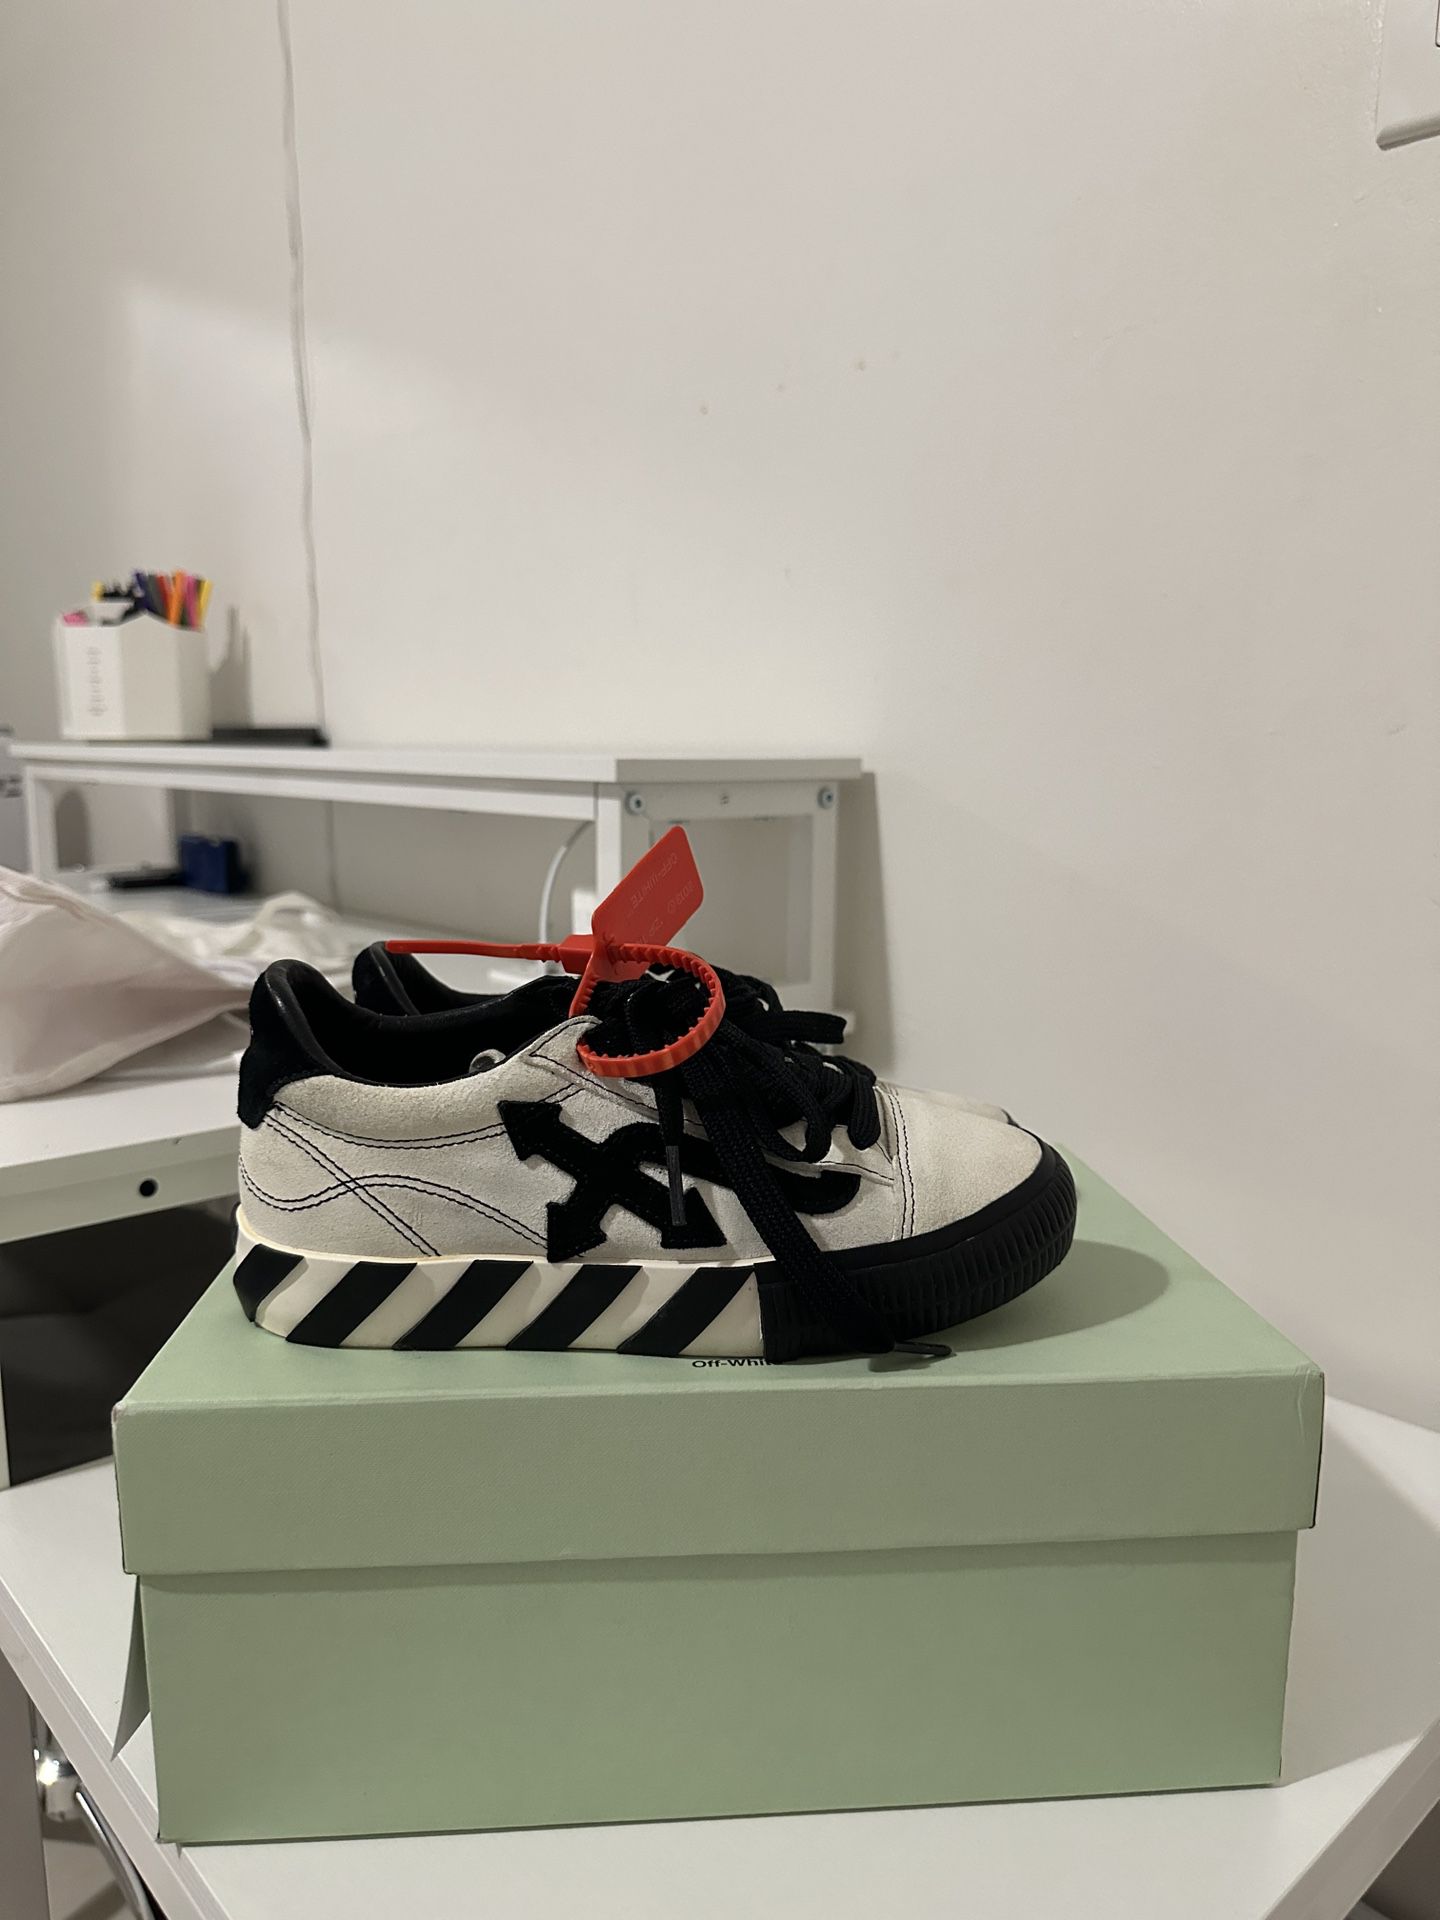 Off white shoes 